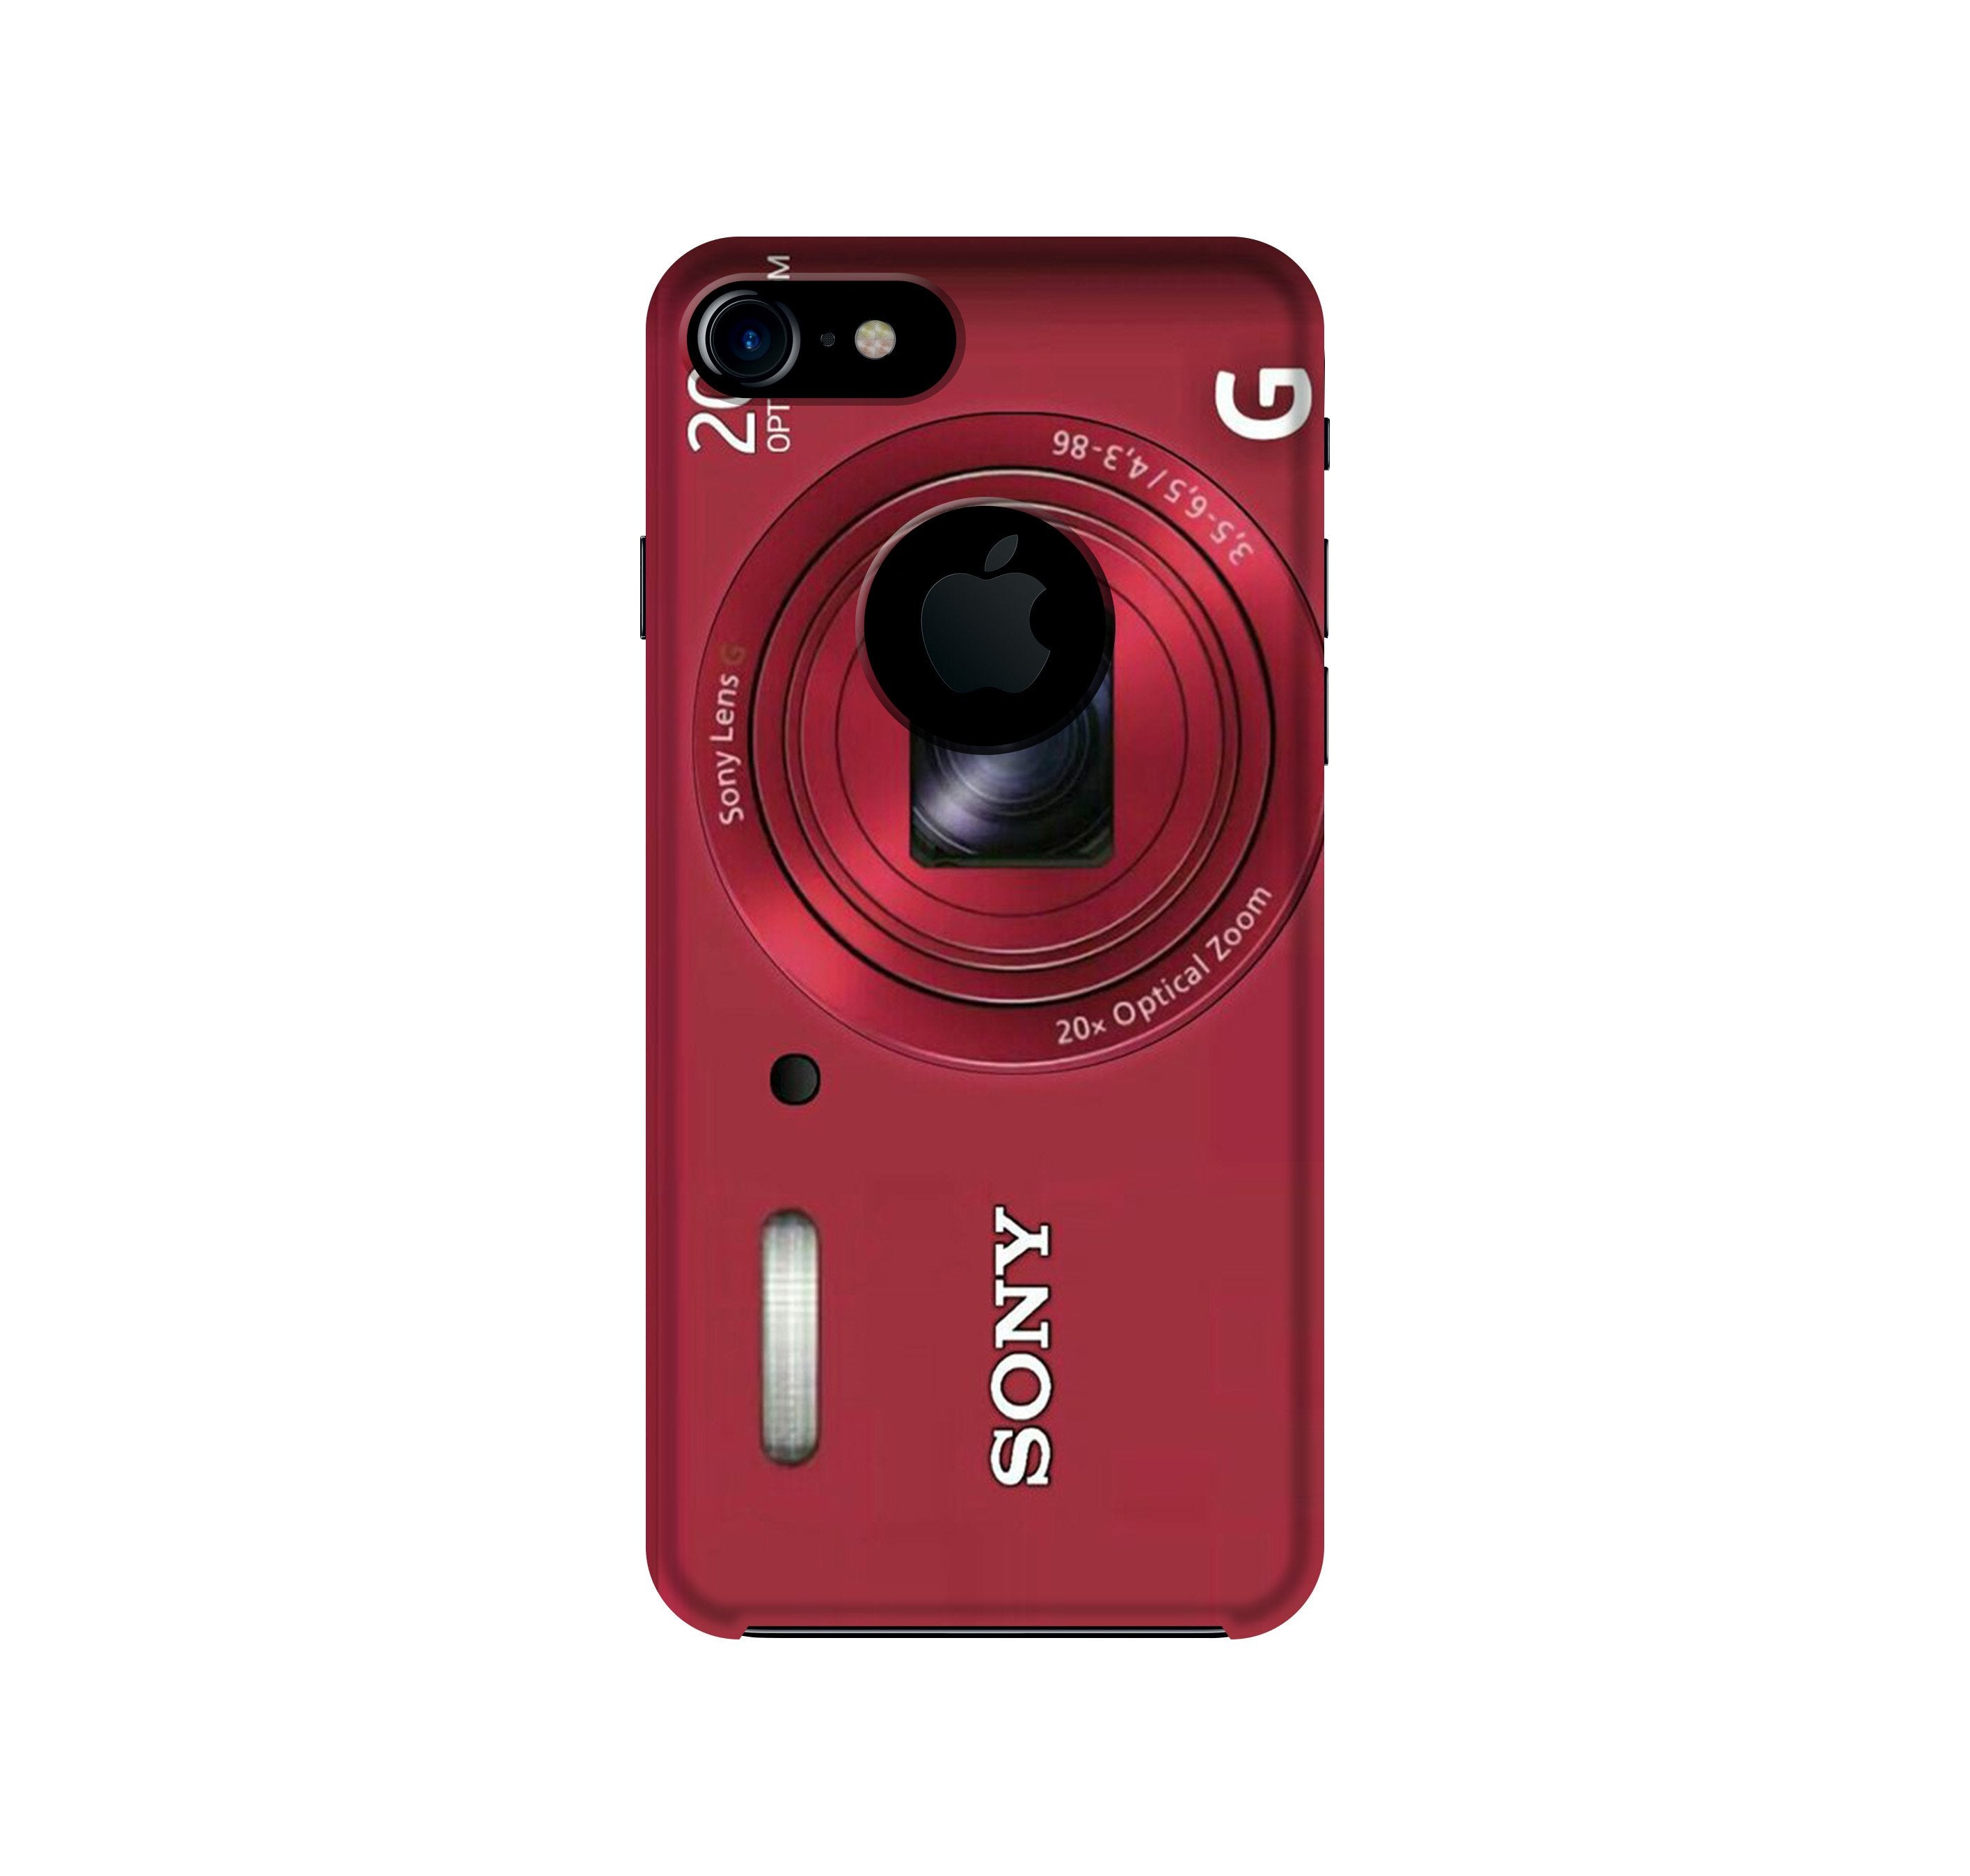 Sony Case for iPhone 7 logo cut (Design No. 274)